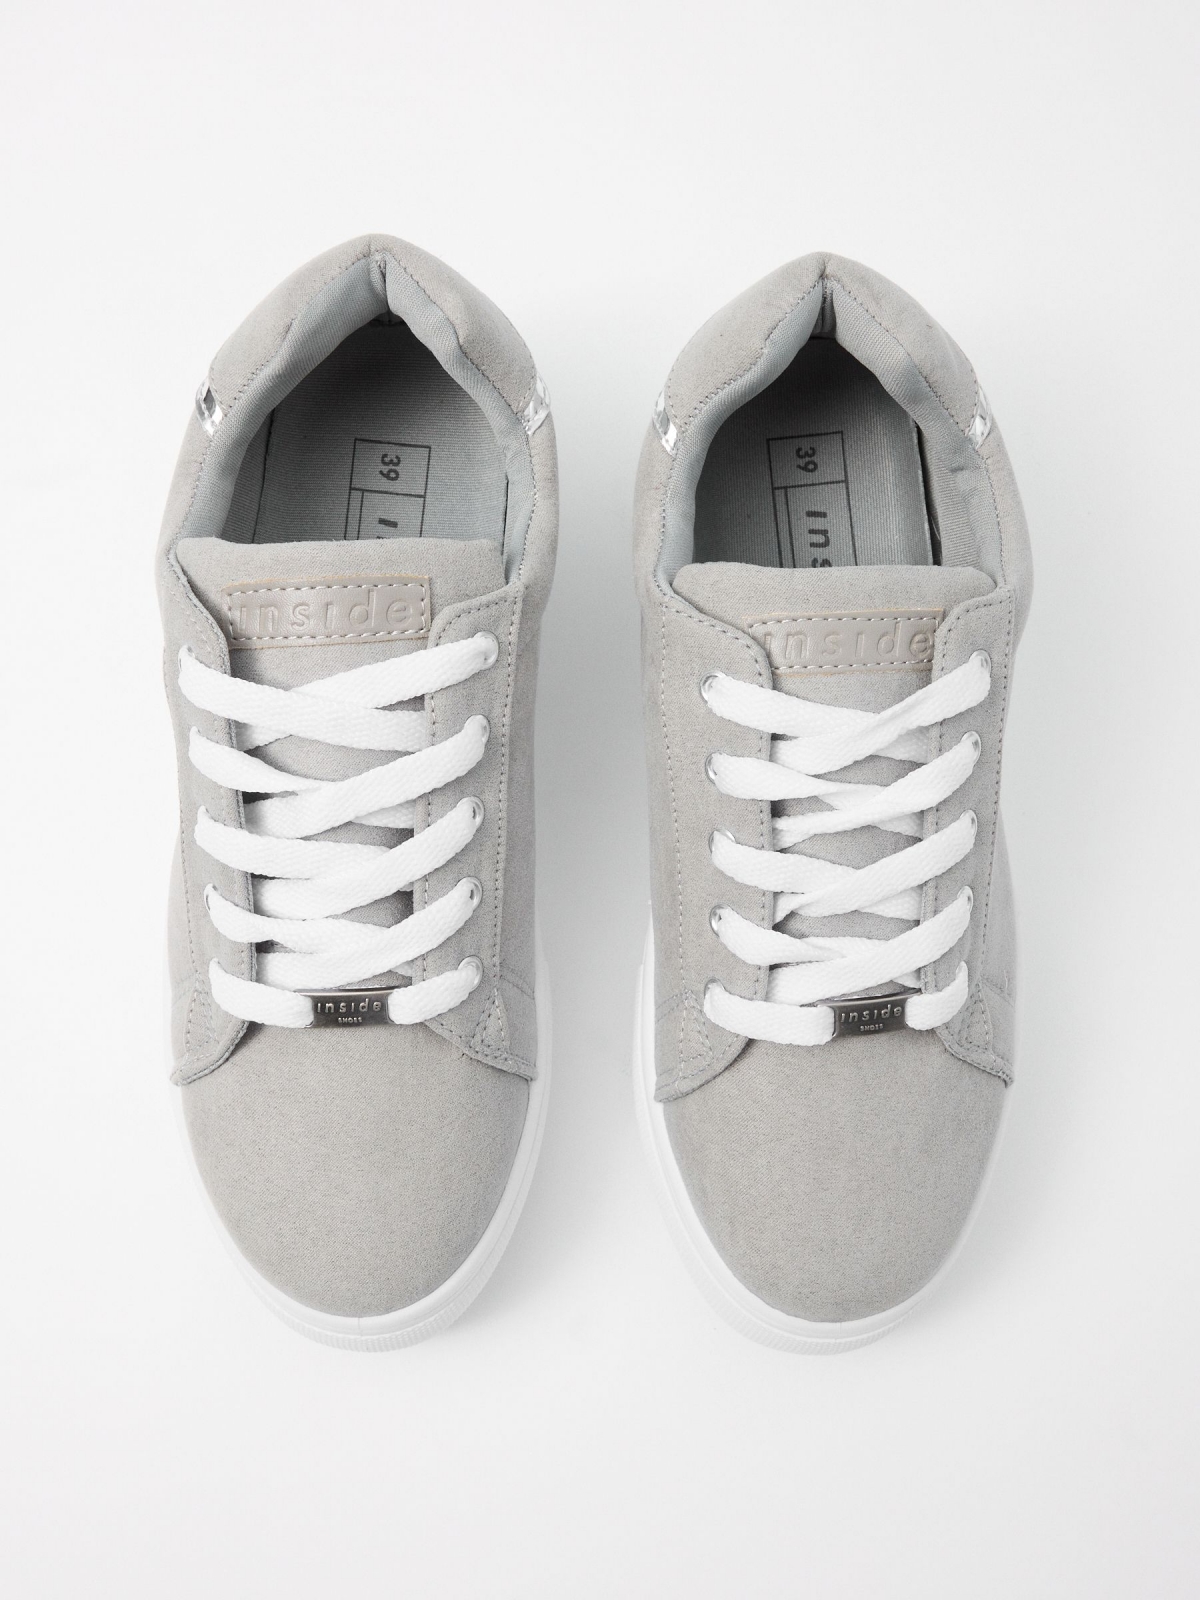 Casual sneaker with silverofmra grey zenithal view